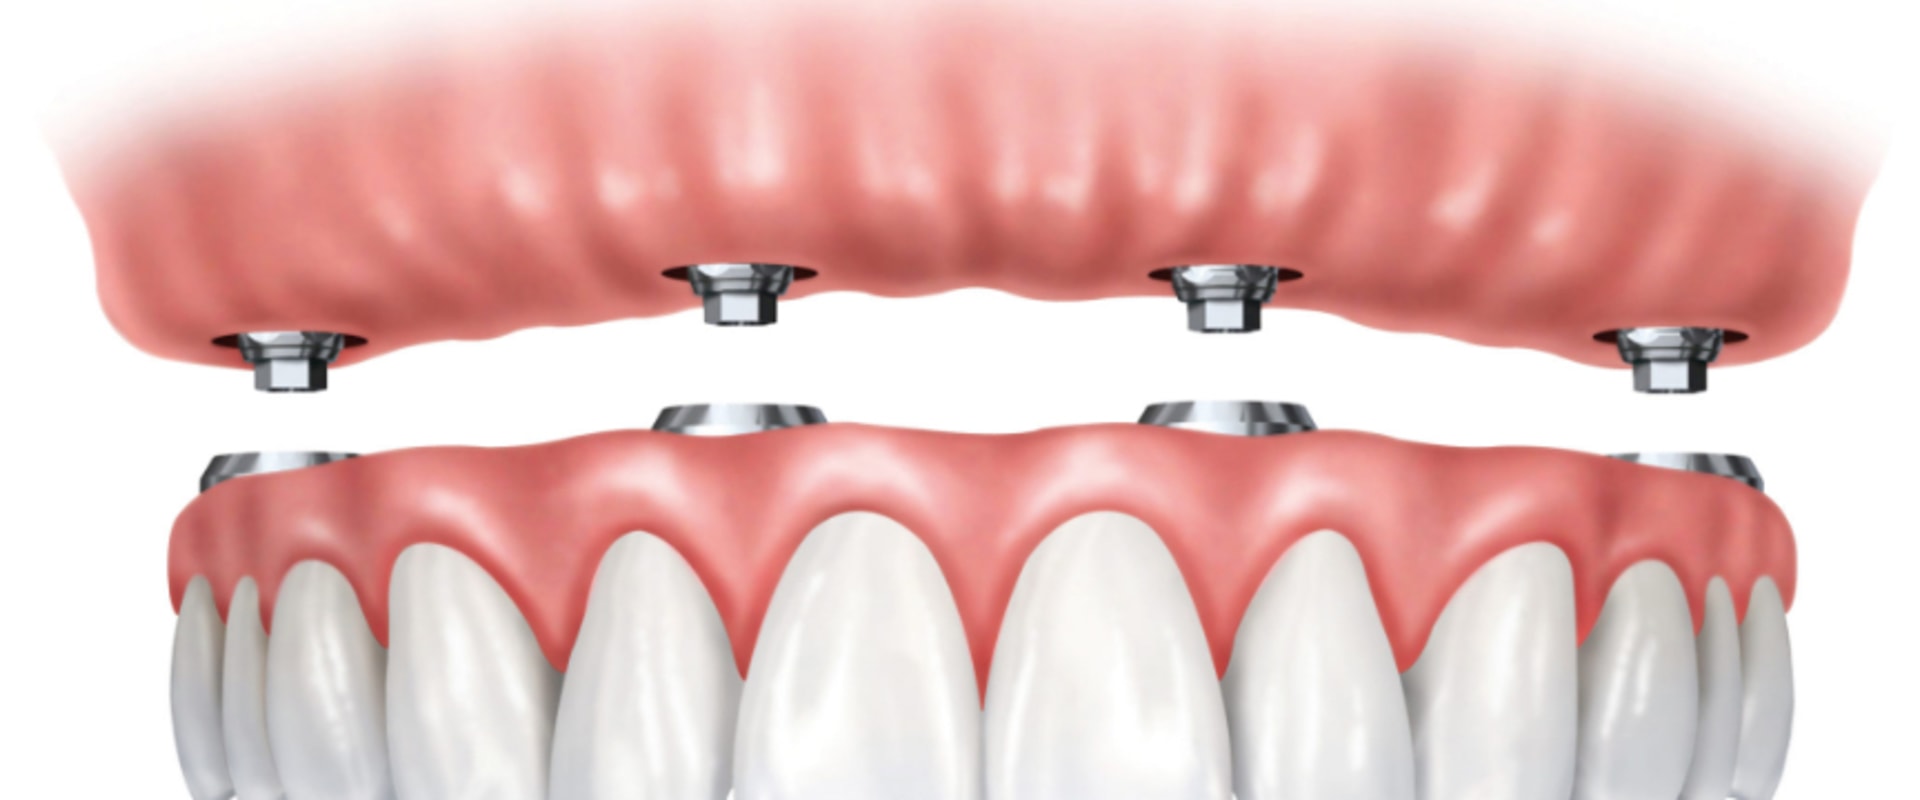 Finding the Right Dentist for Your Dentures